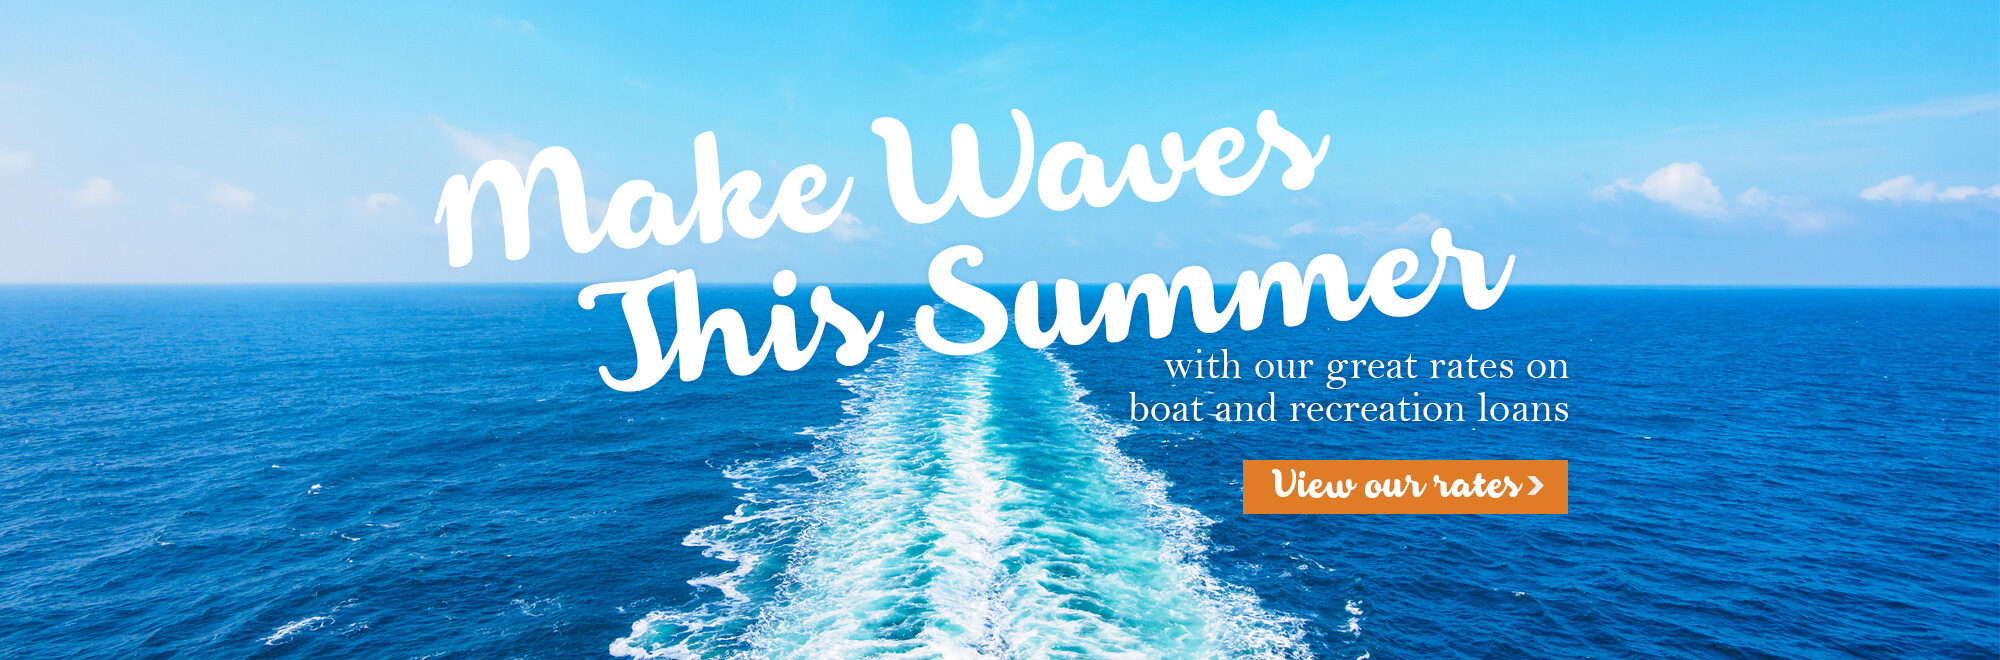 Make waves this summer with our great rates on boat and recreation loans. View our rates.